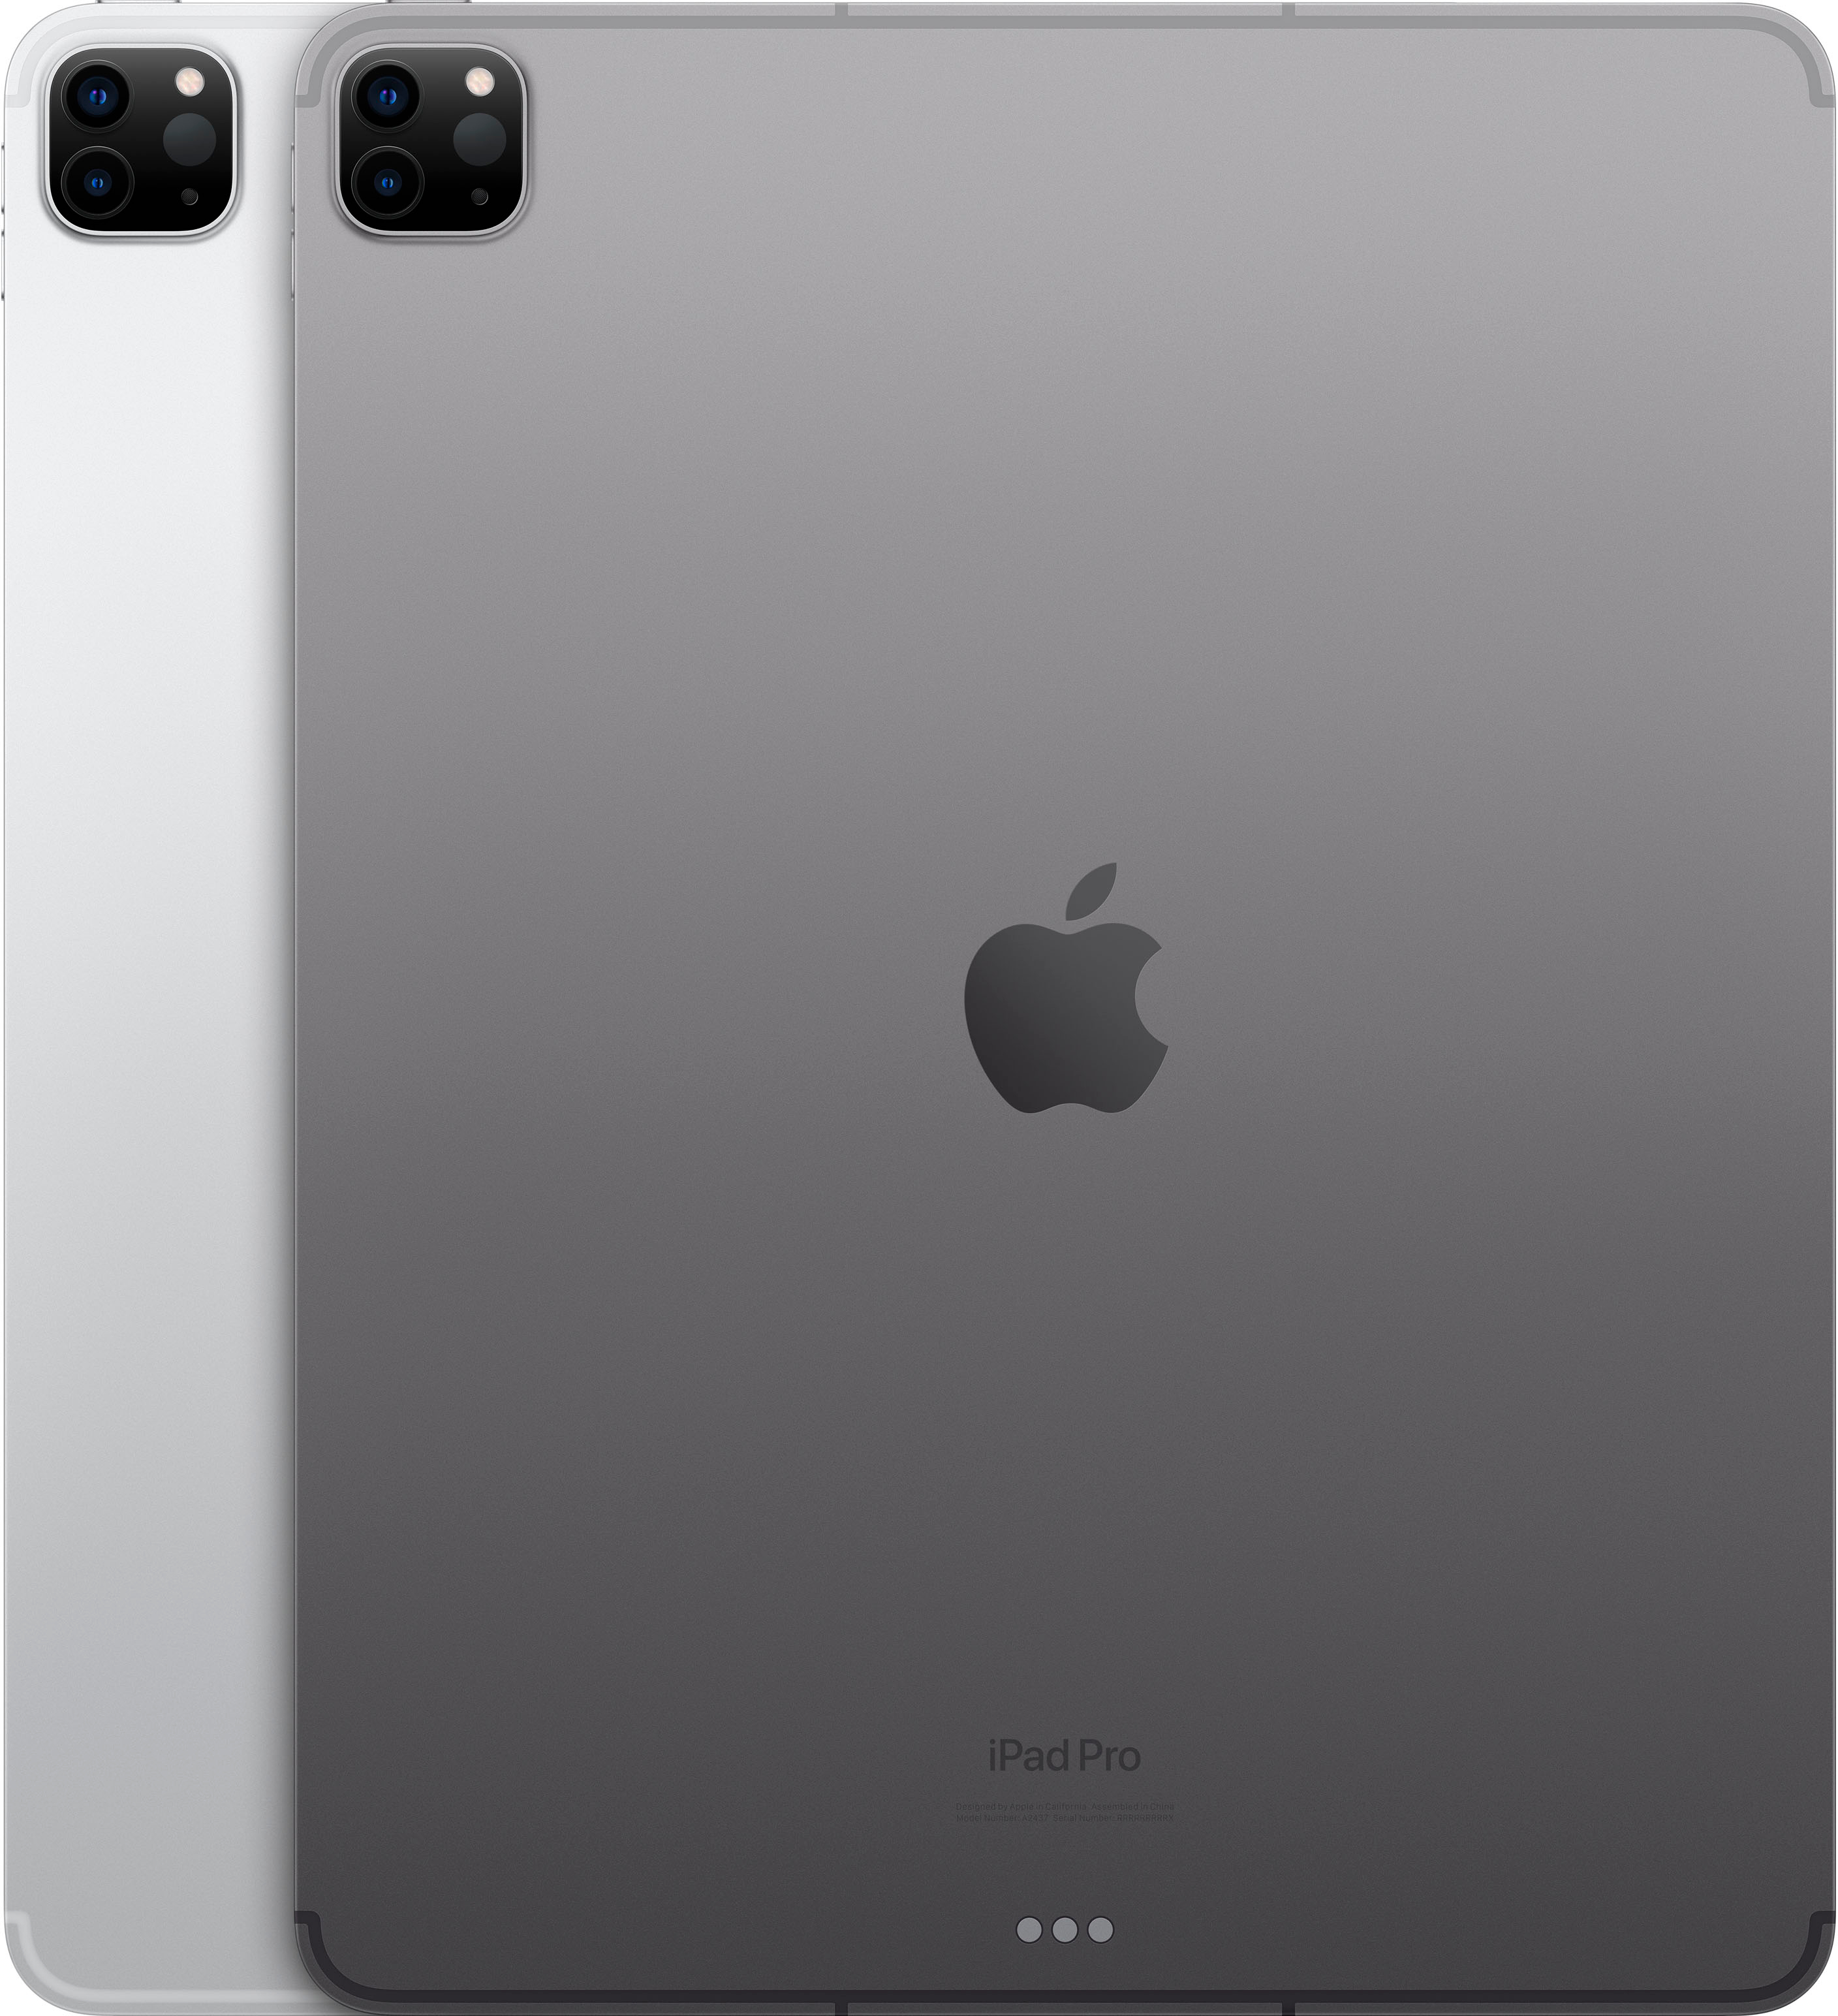 Apple 12.9-Inch iPad Pro (Latest Model) with Wi-Fi + Cellular